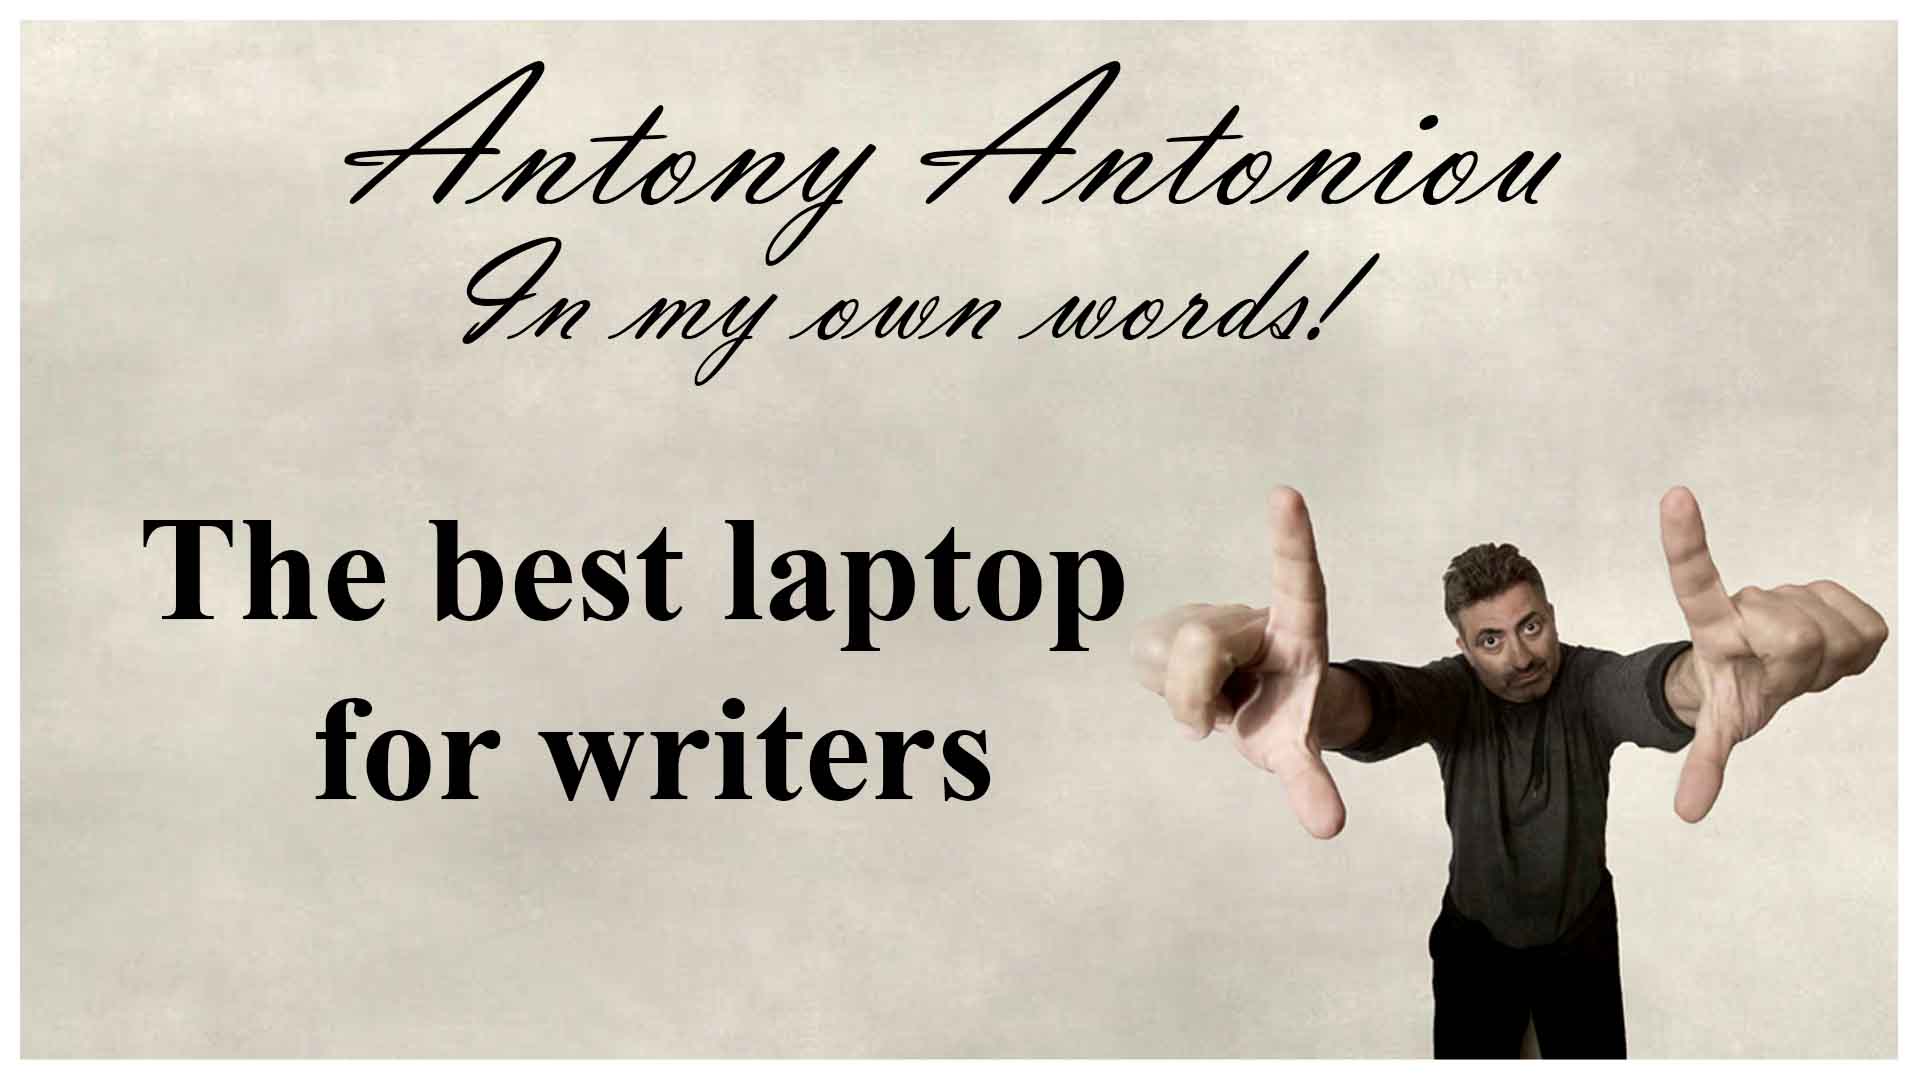 The best laptop for writers